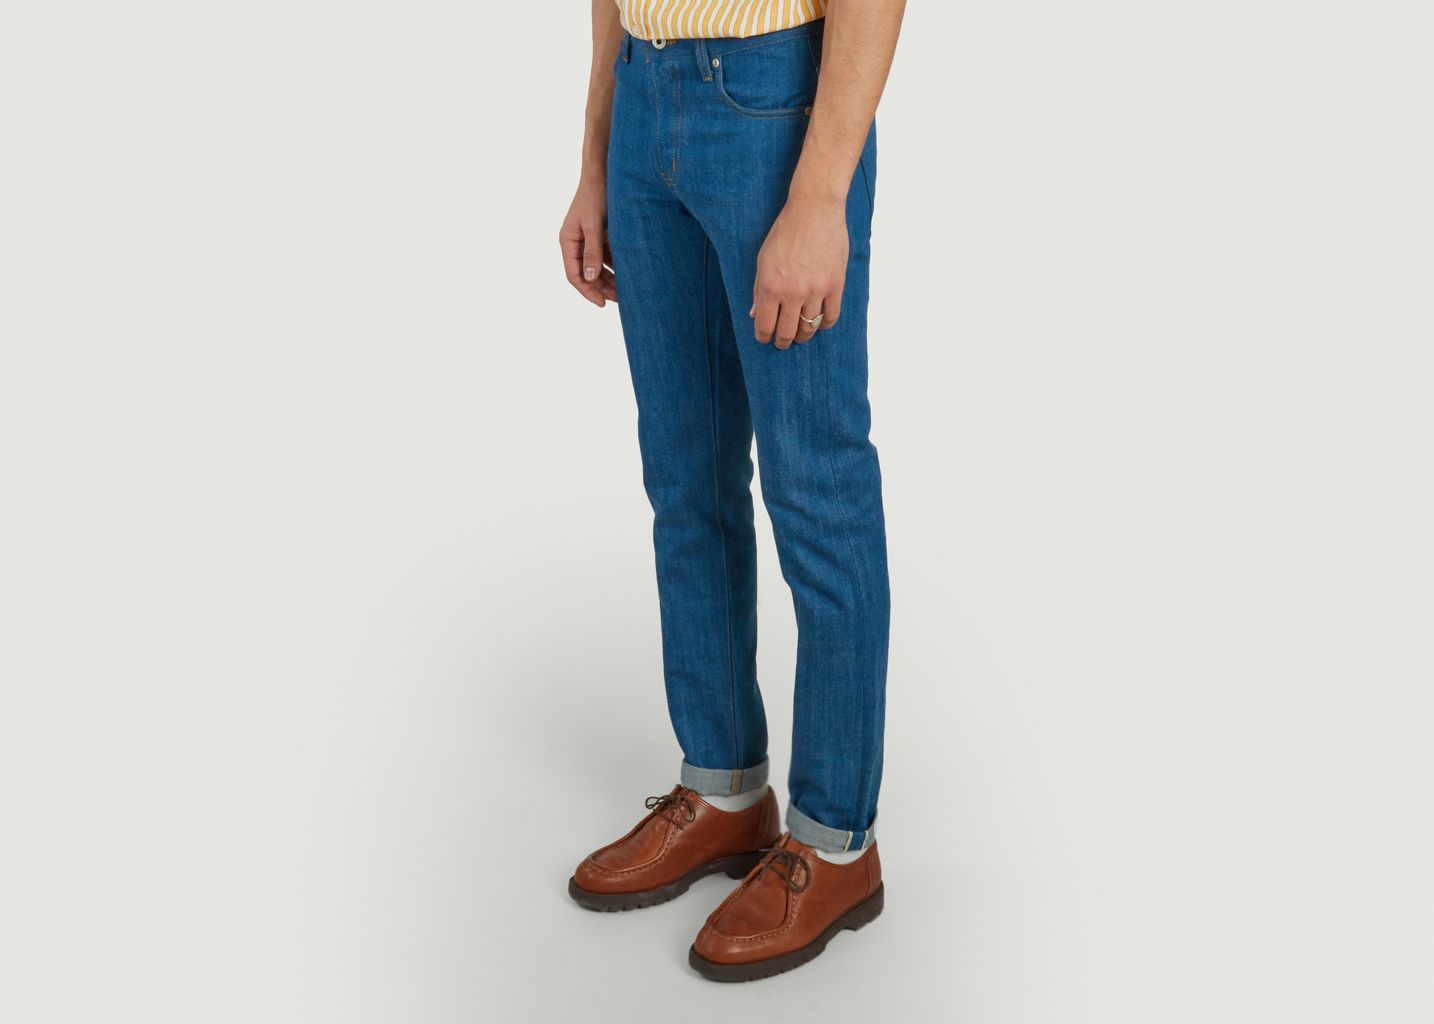 Jeans Super Guy Oceans Edge Selvedge - Naked and Famous